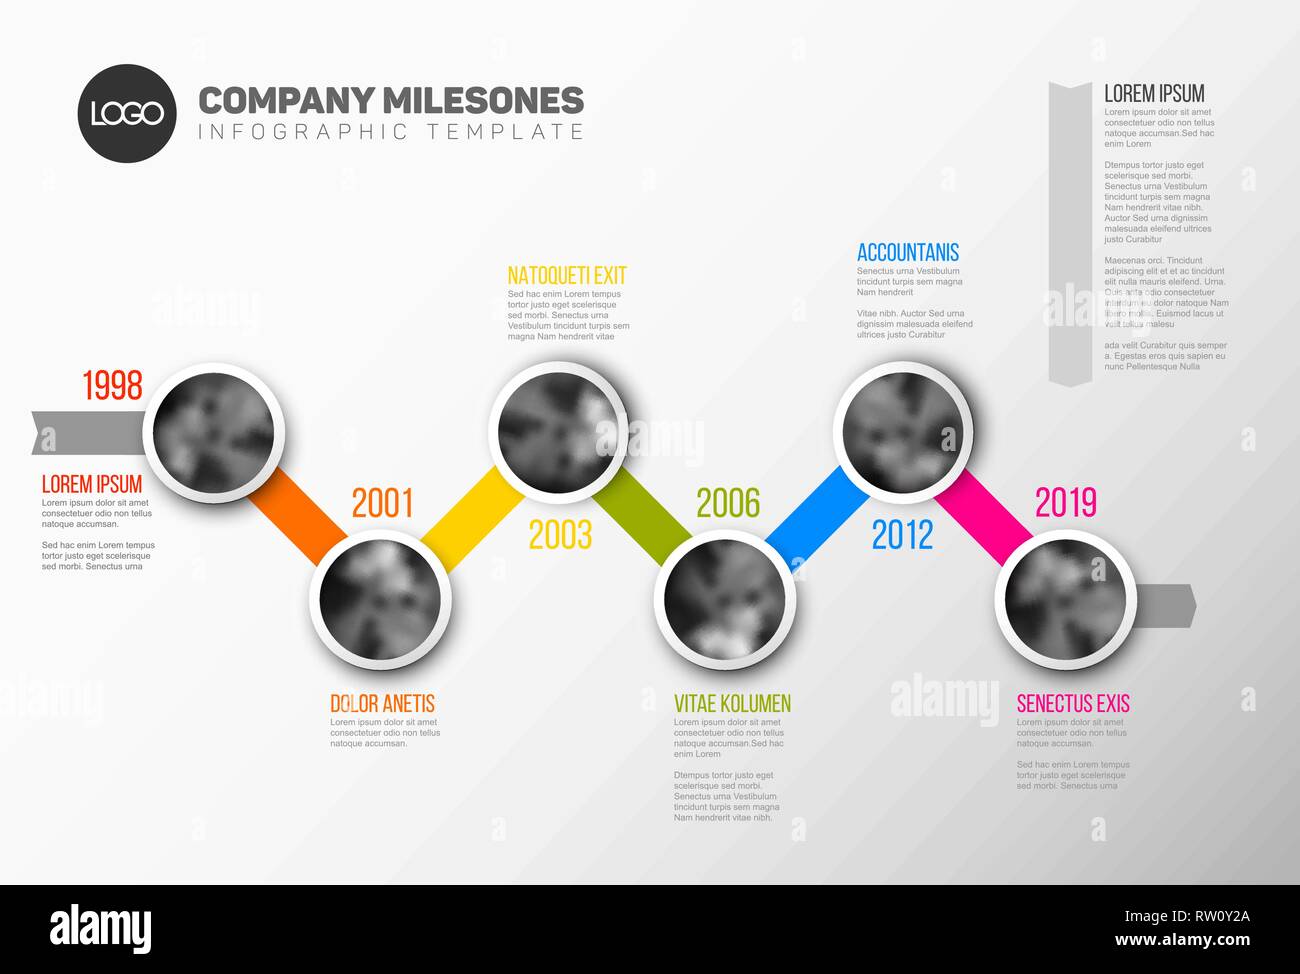 Vector Infographic Company Milestones Timeline Template With Circle Photo Placeholders On 4379